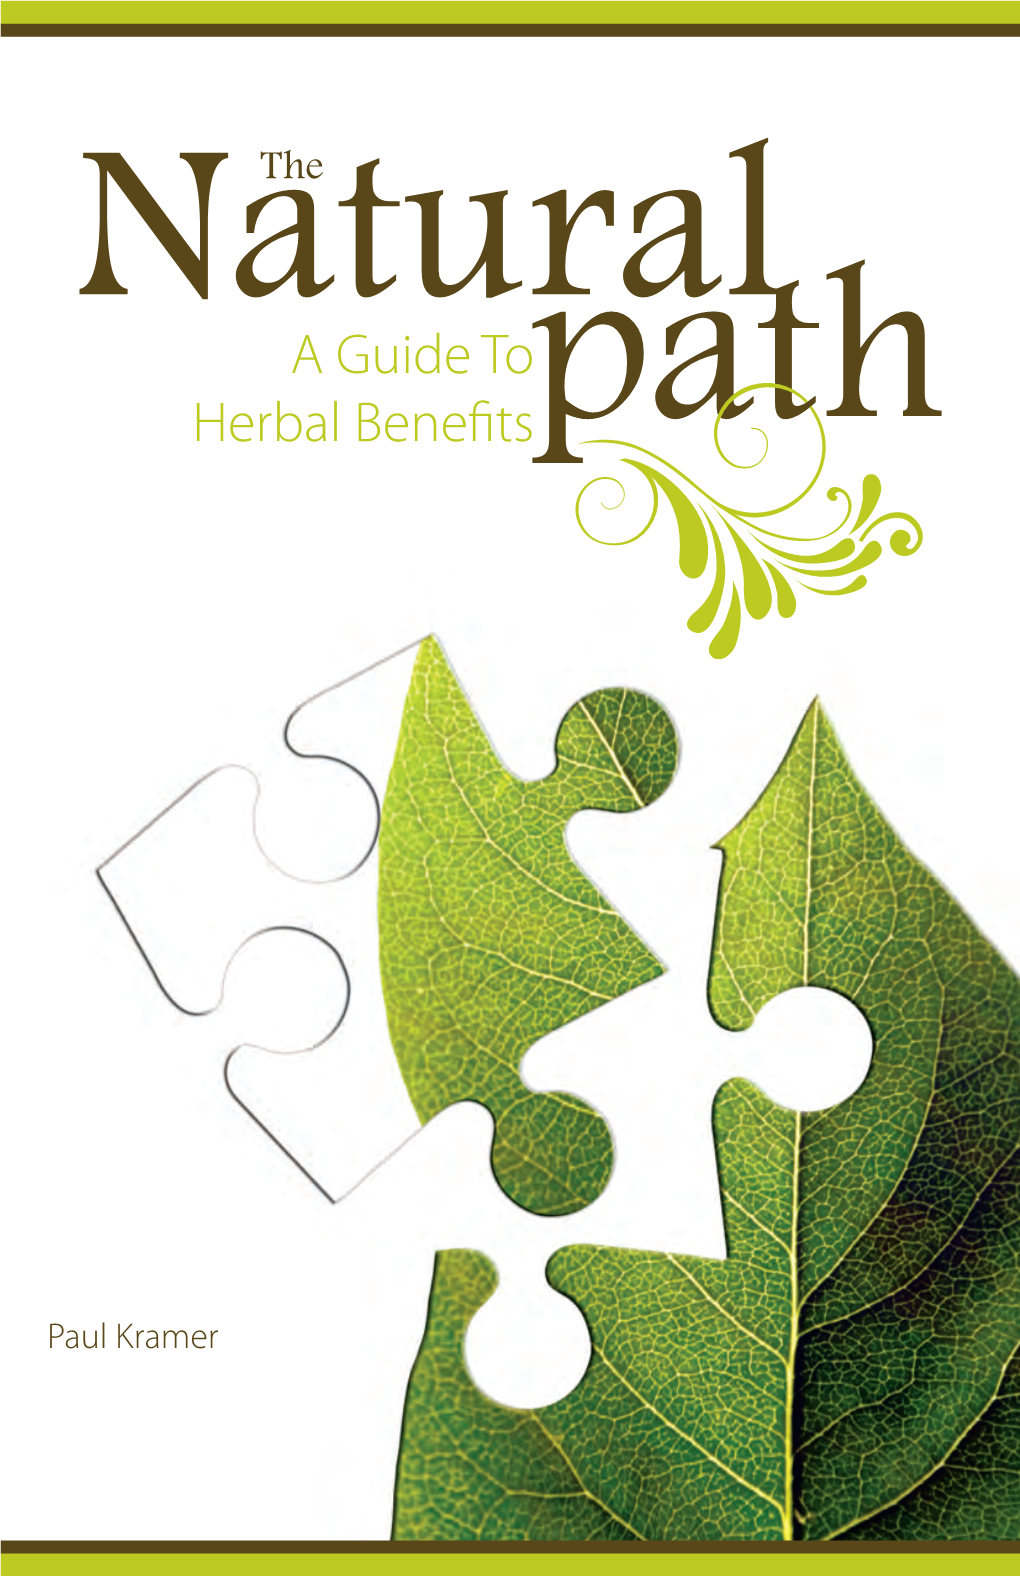 The Natural Path Herbal Guide